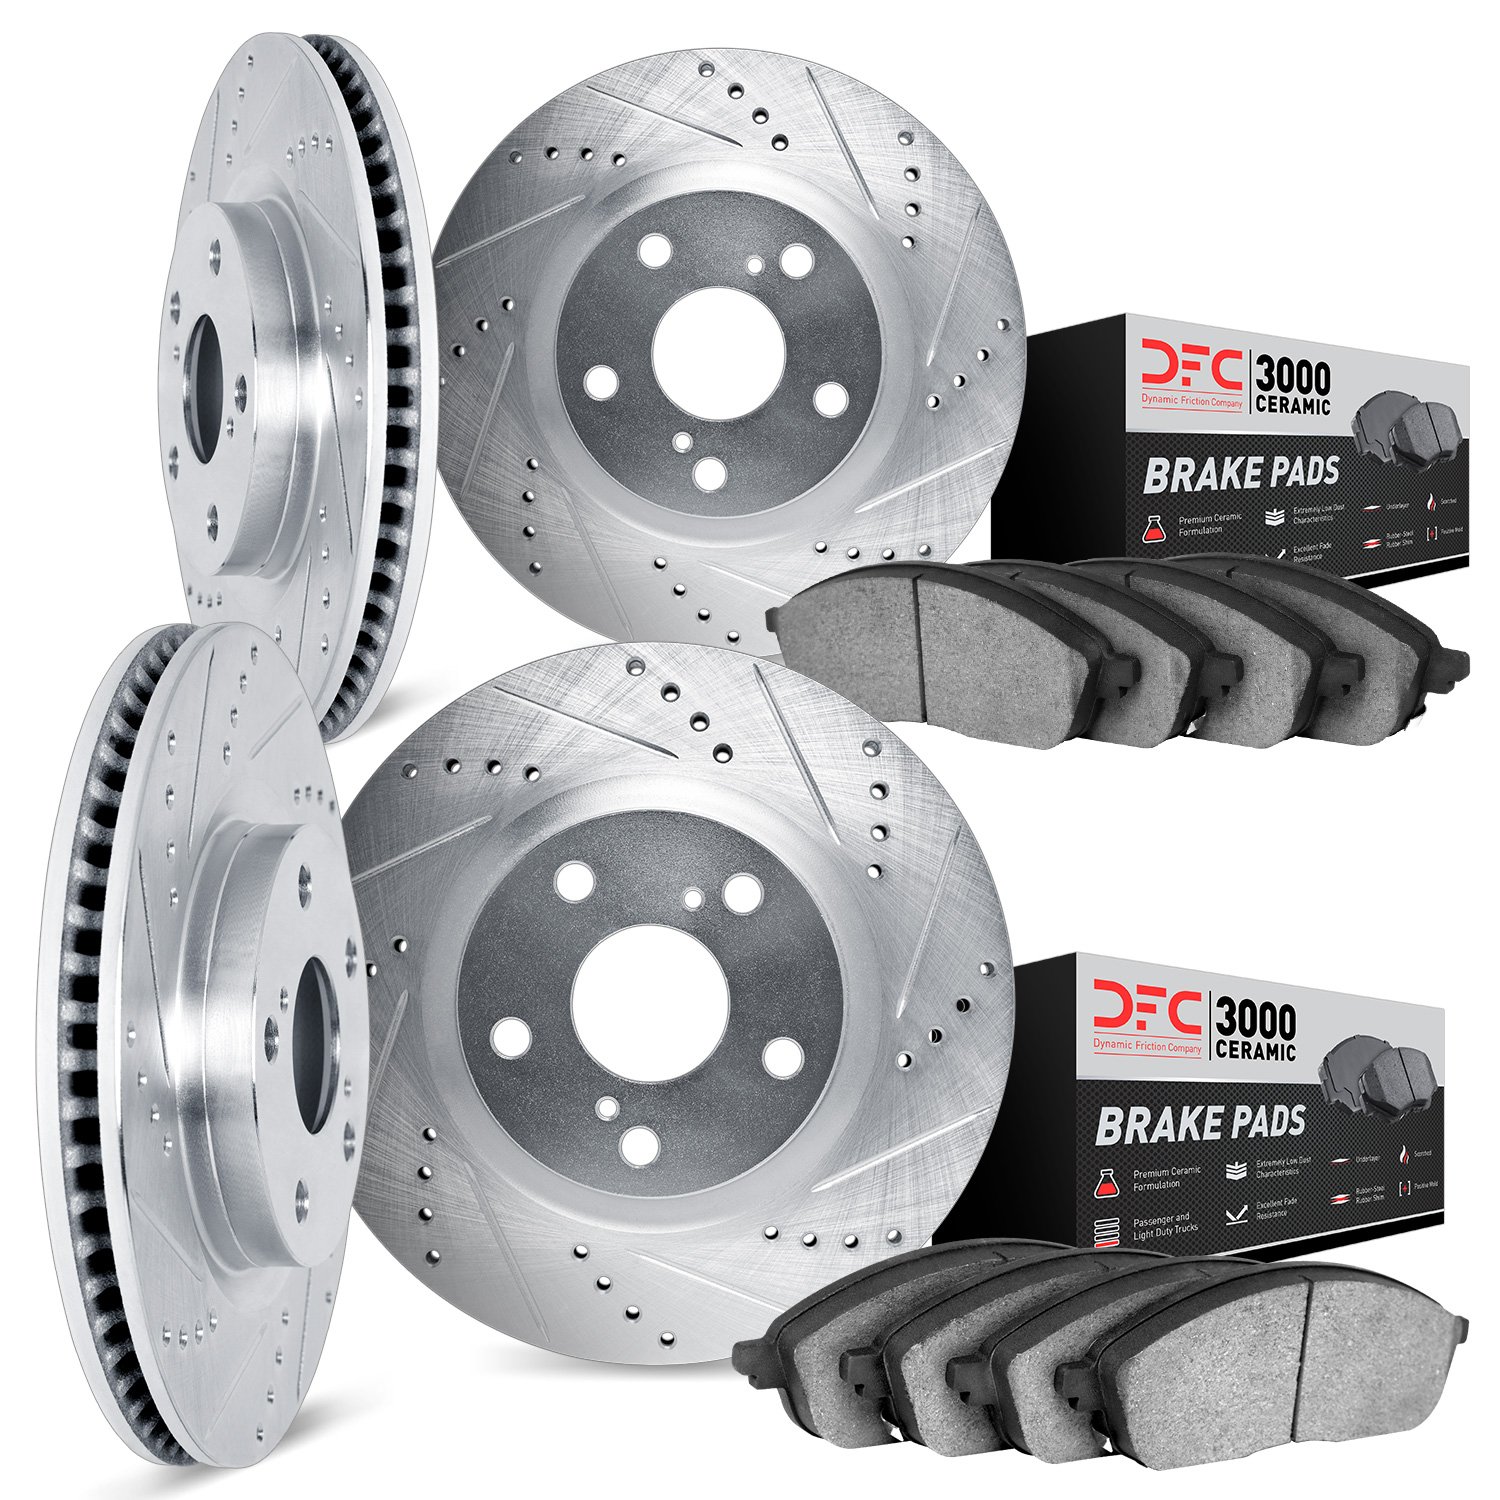 7304-56029 Drilled/Slotted Brake Rotor with 3000-Series Ceramic Brake Pads Kit [Silver], 2003-2011 Ford/Lincoln/Mercury/Mazda, P